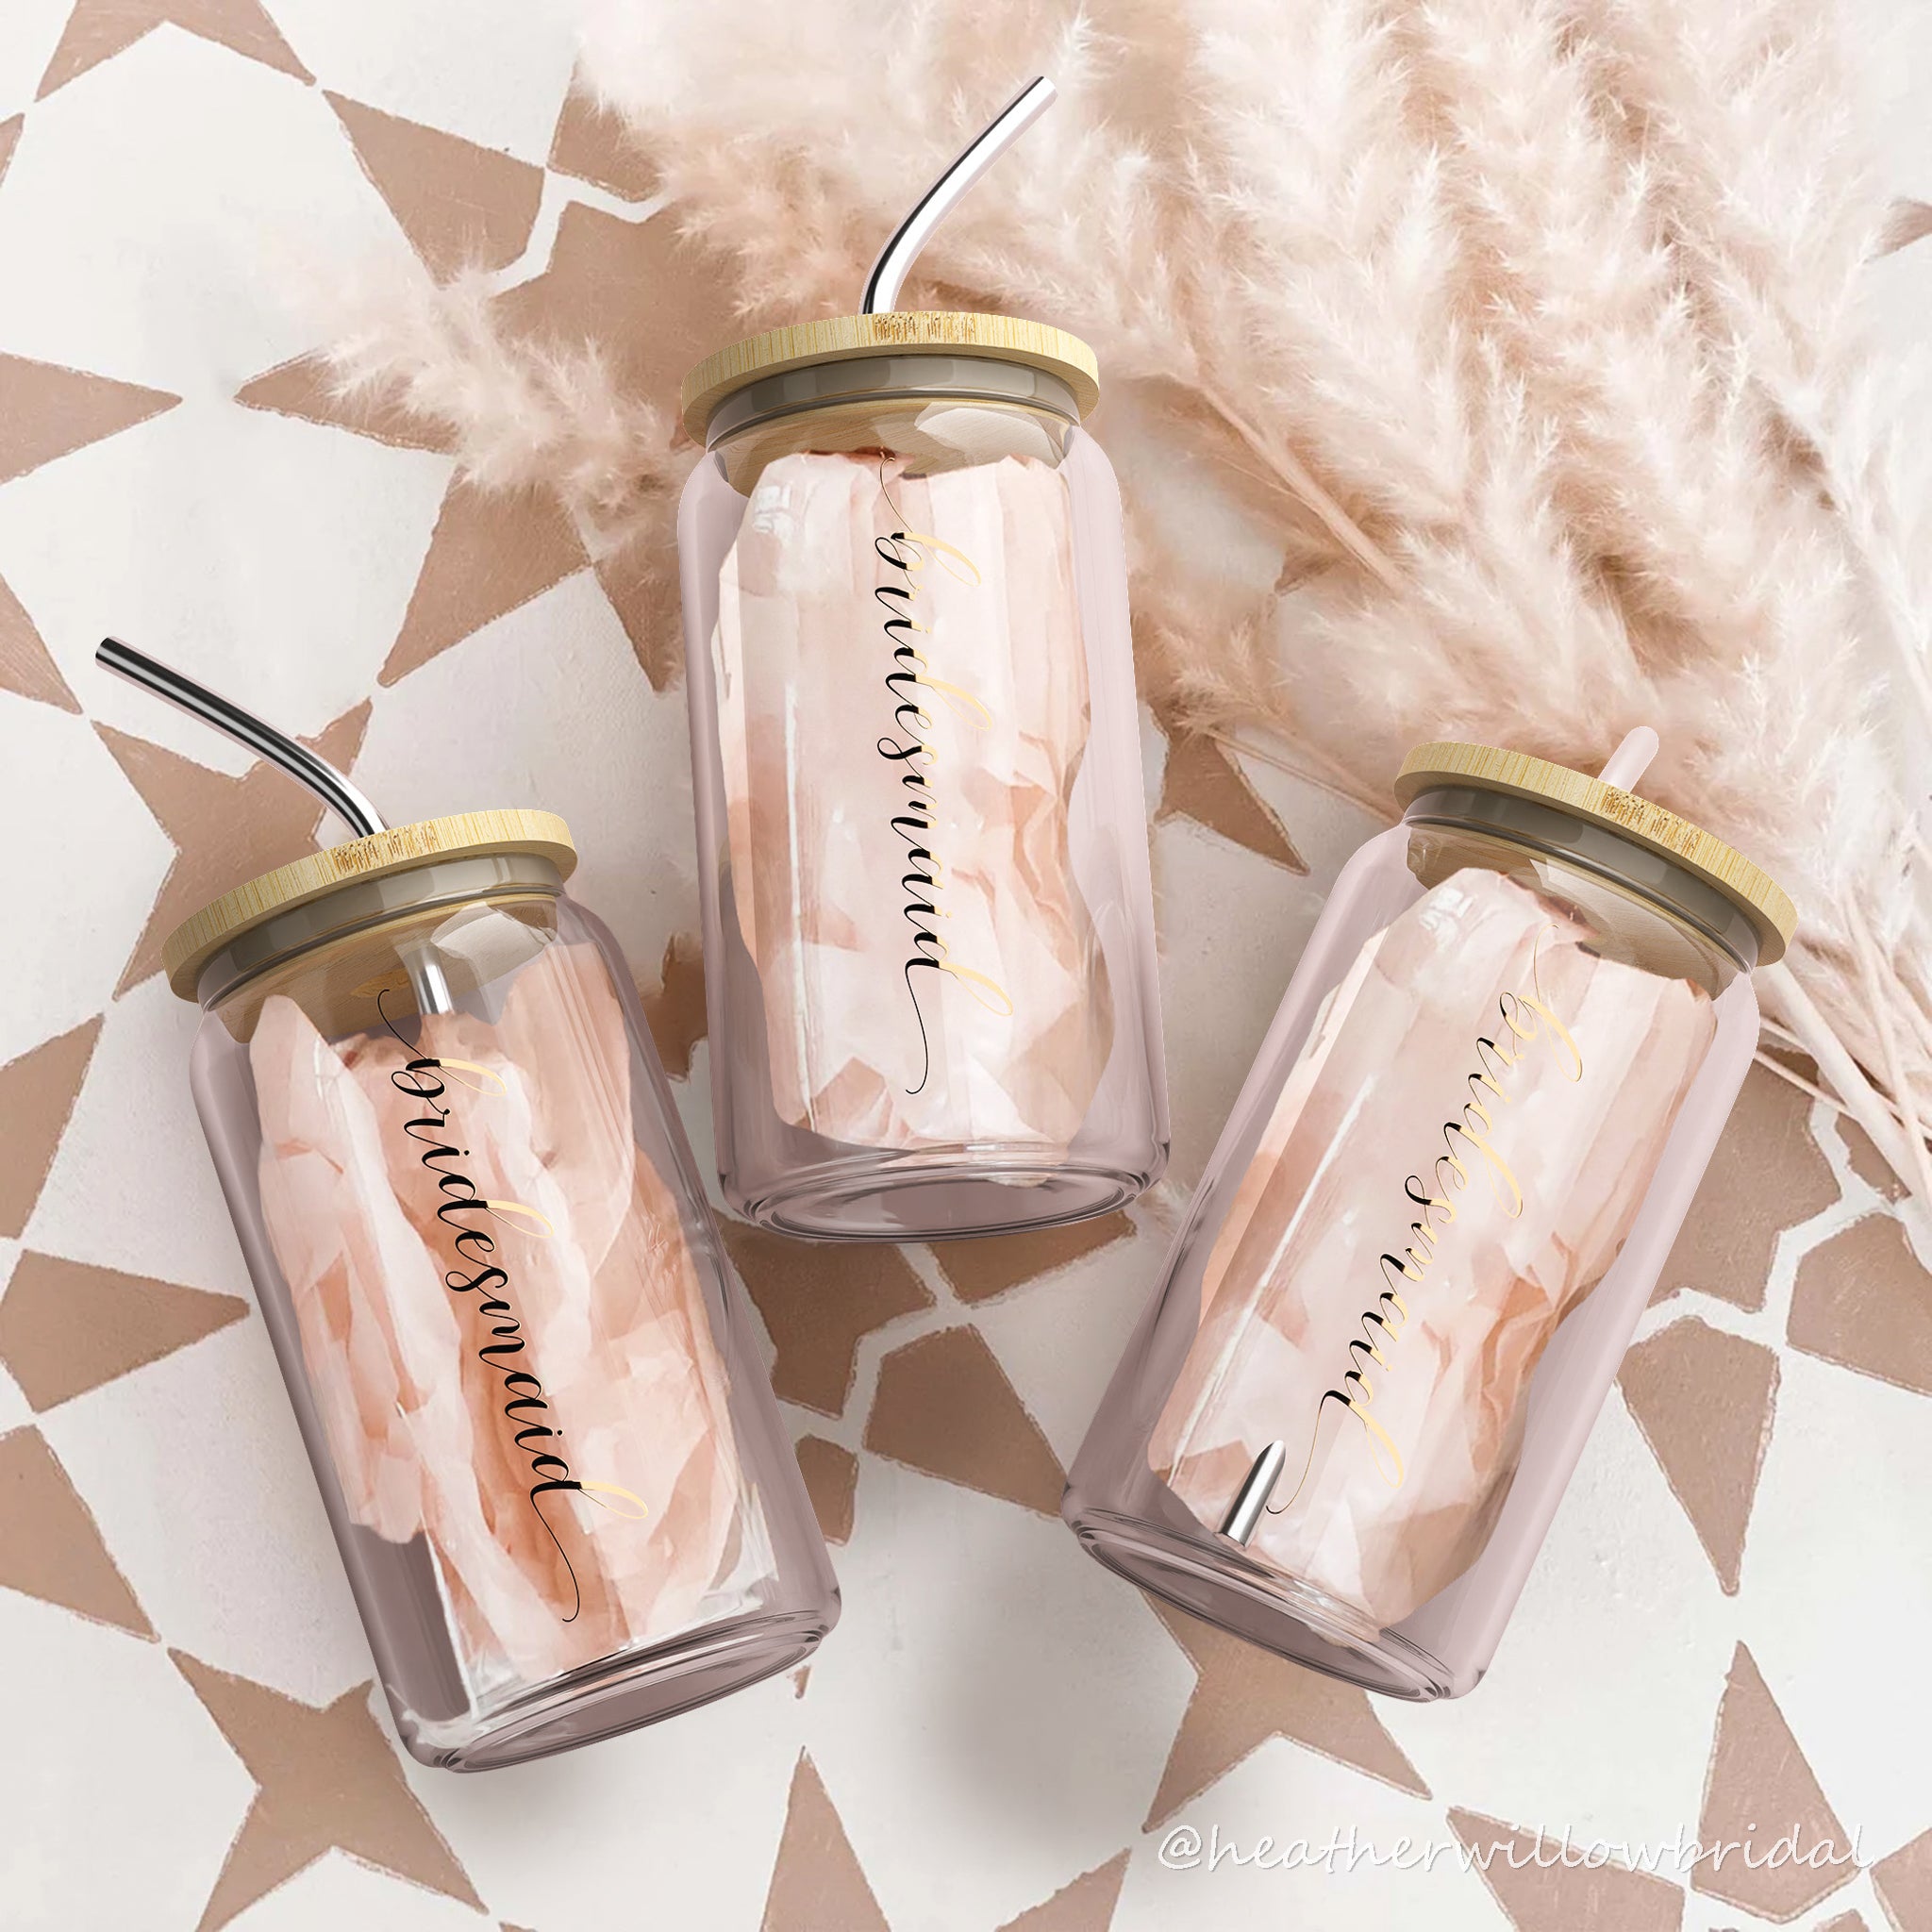 Bride to Be Iced Coffee Cup with Bamboo Lids and Straws | 16 oz Mason Jar Cups | Bridesmaid Proposal Gifts, Bridal Shower Favors, Bachelorette Party Supplies & Bride Tribe | Rose Gold